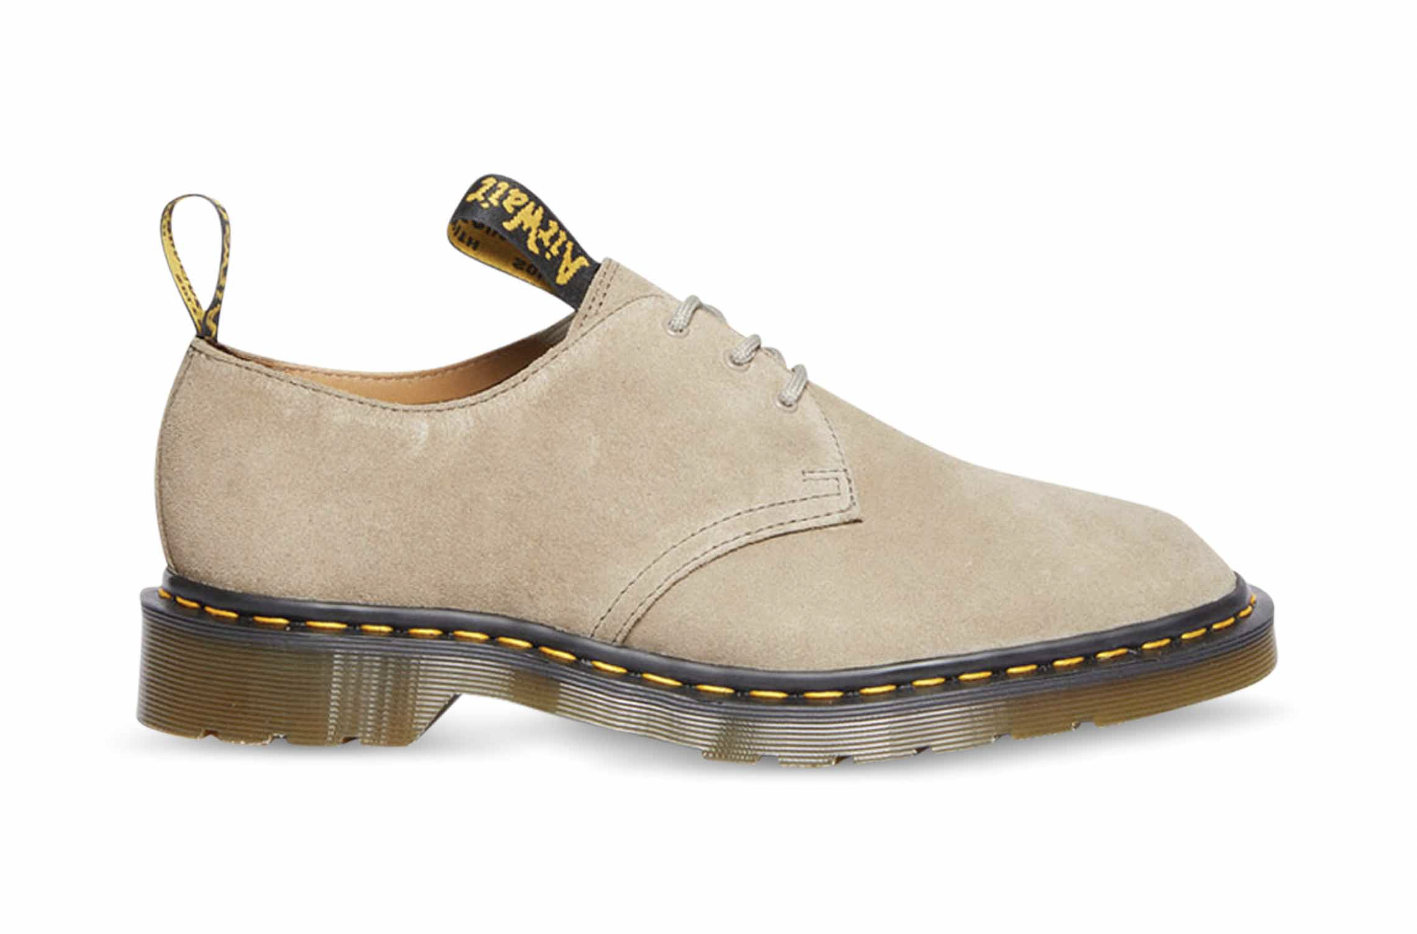 Dr Martens x Engineered Garments 1461 Suede against a white background